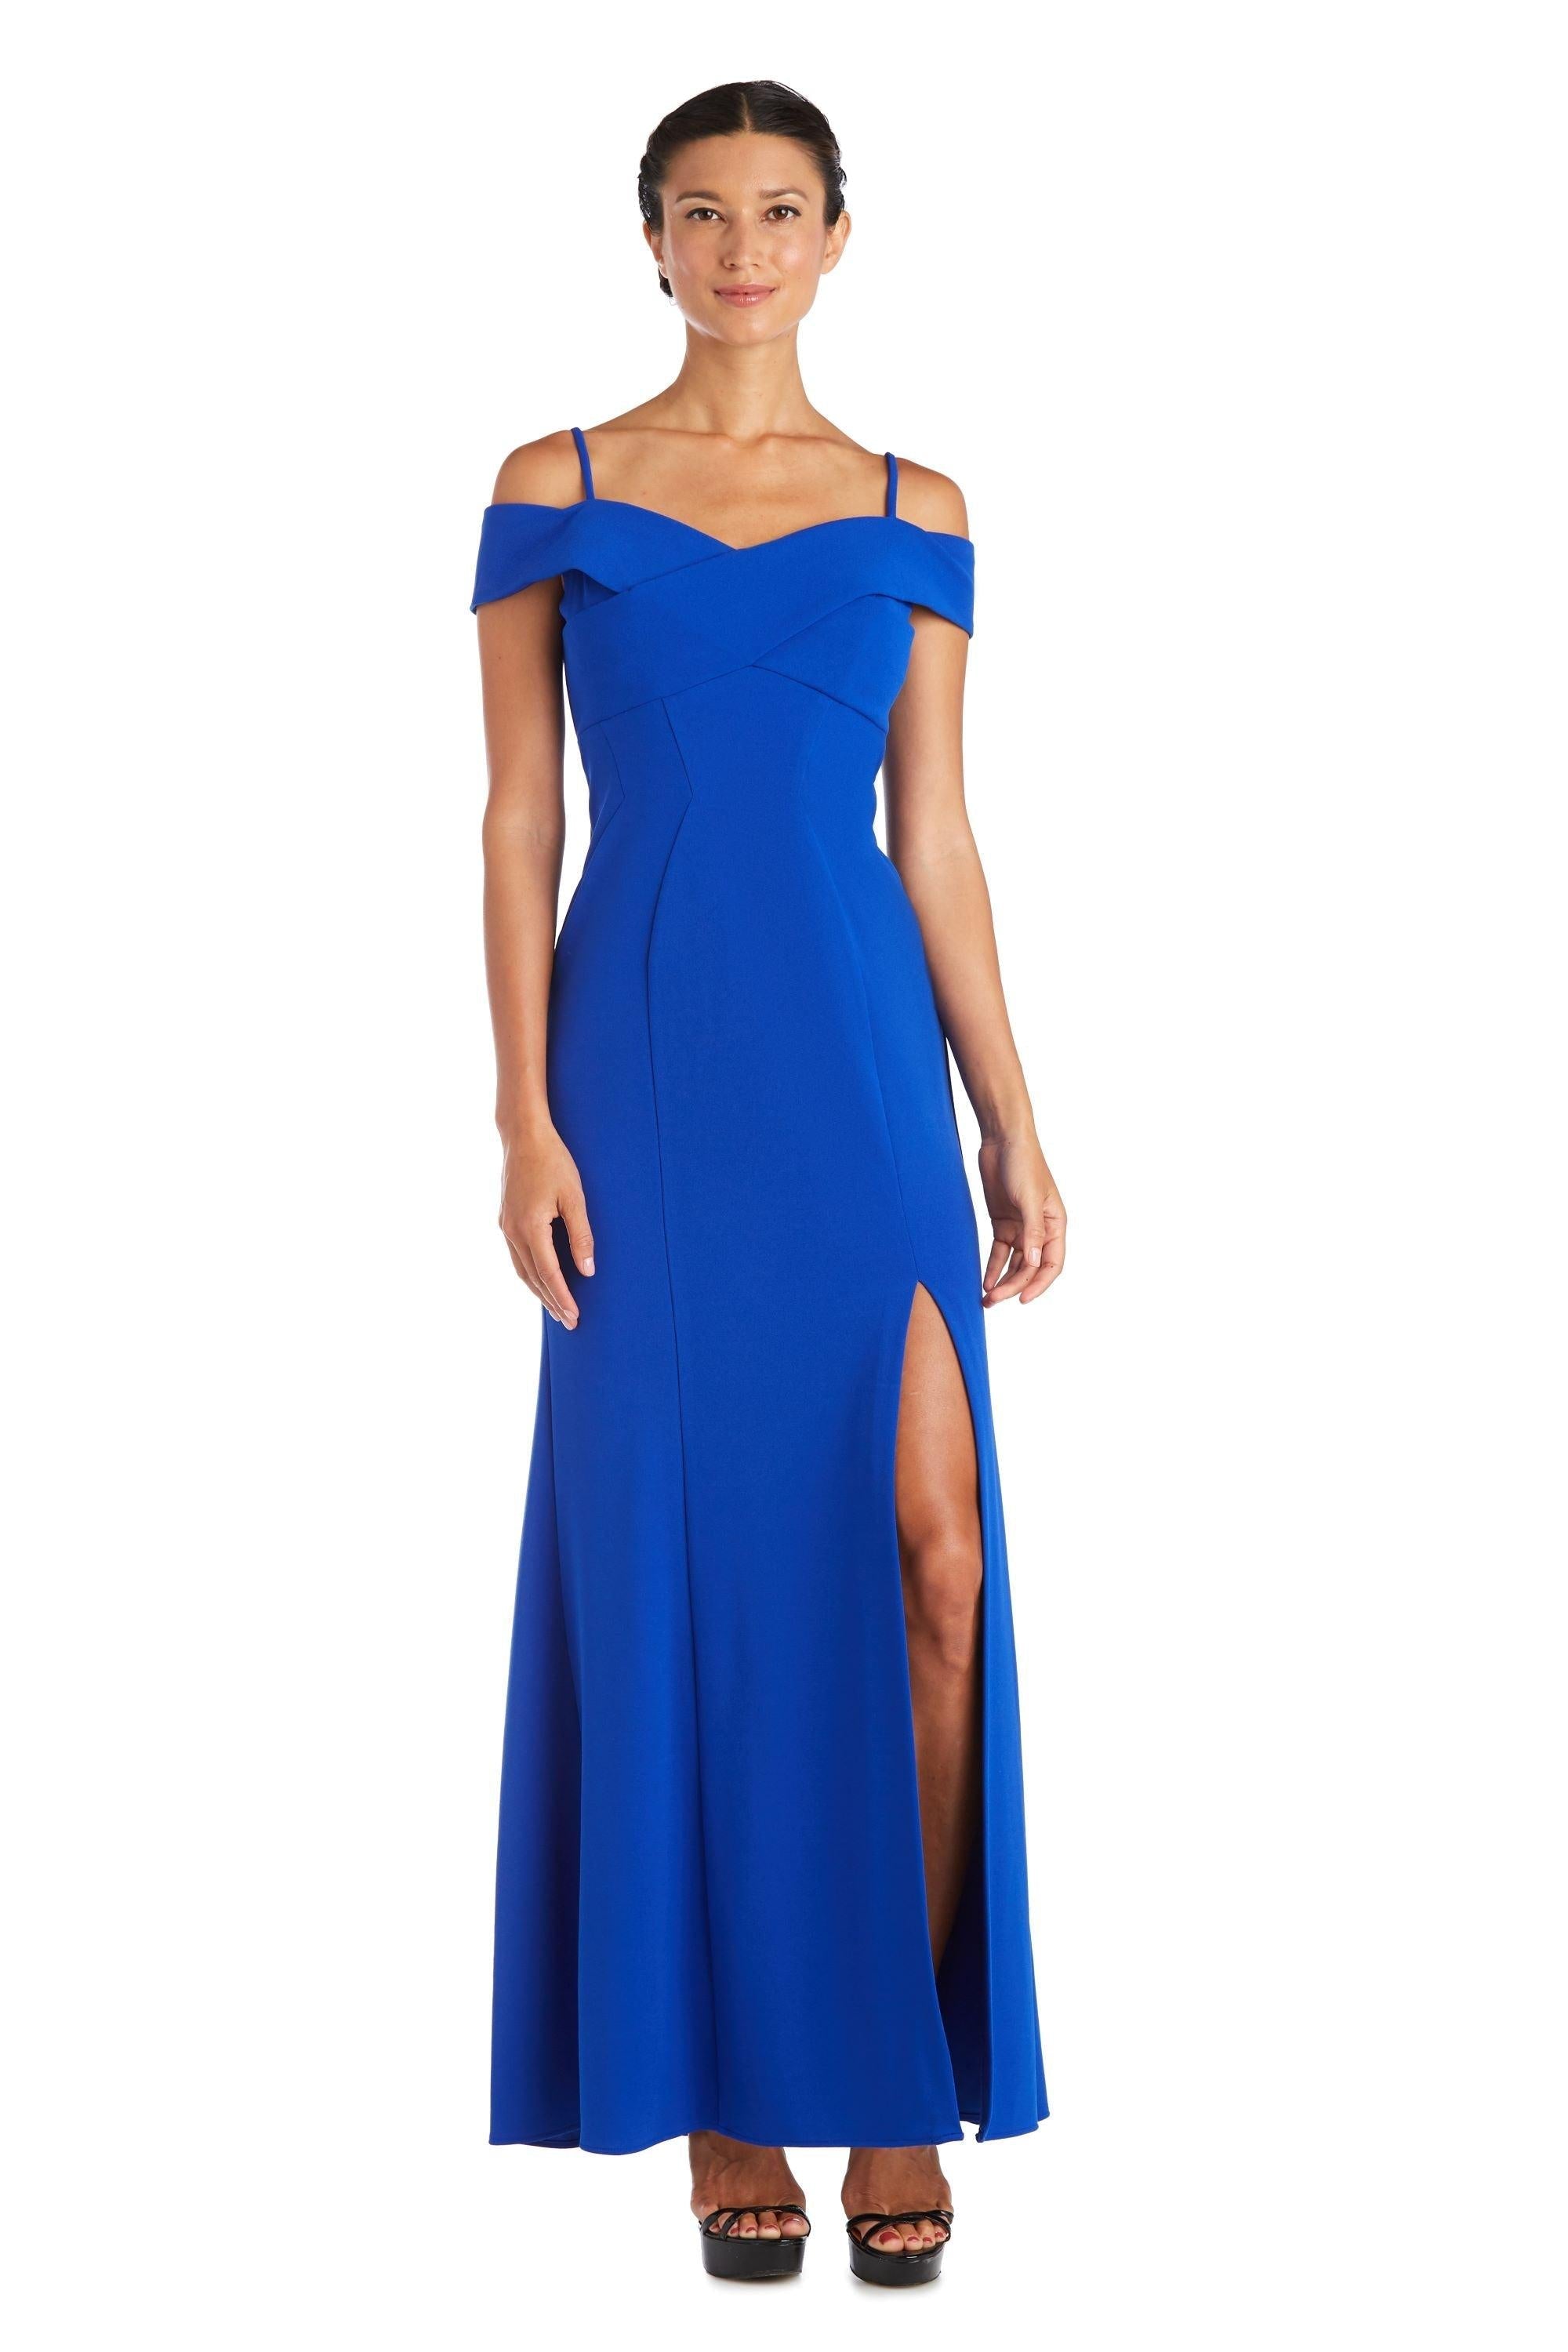 Nightway Long Off Shoulder Petite Formal Gown 21825P - The Dress Outlet